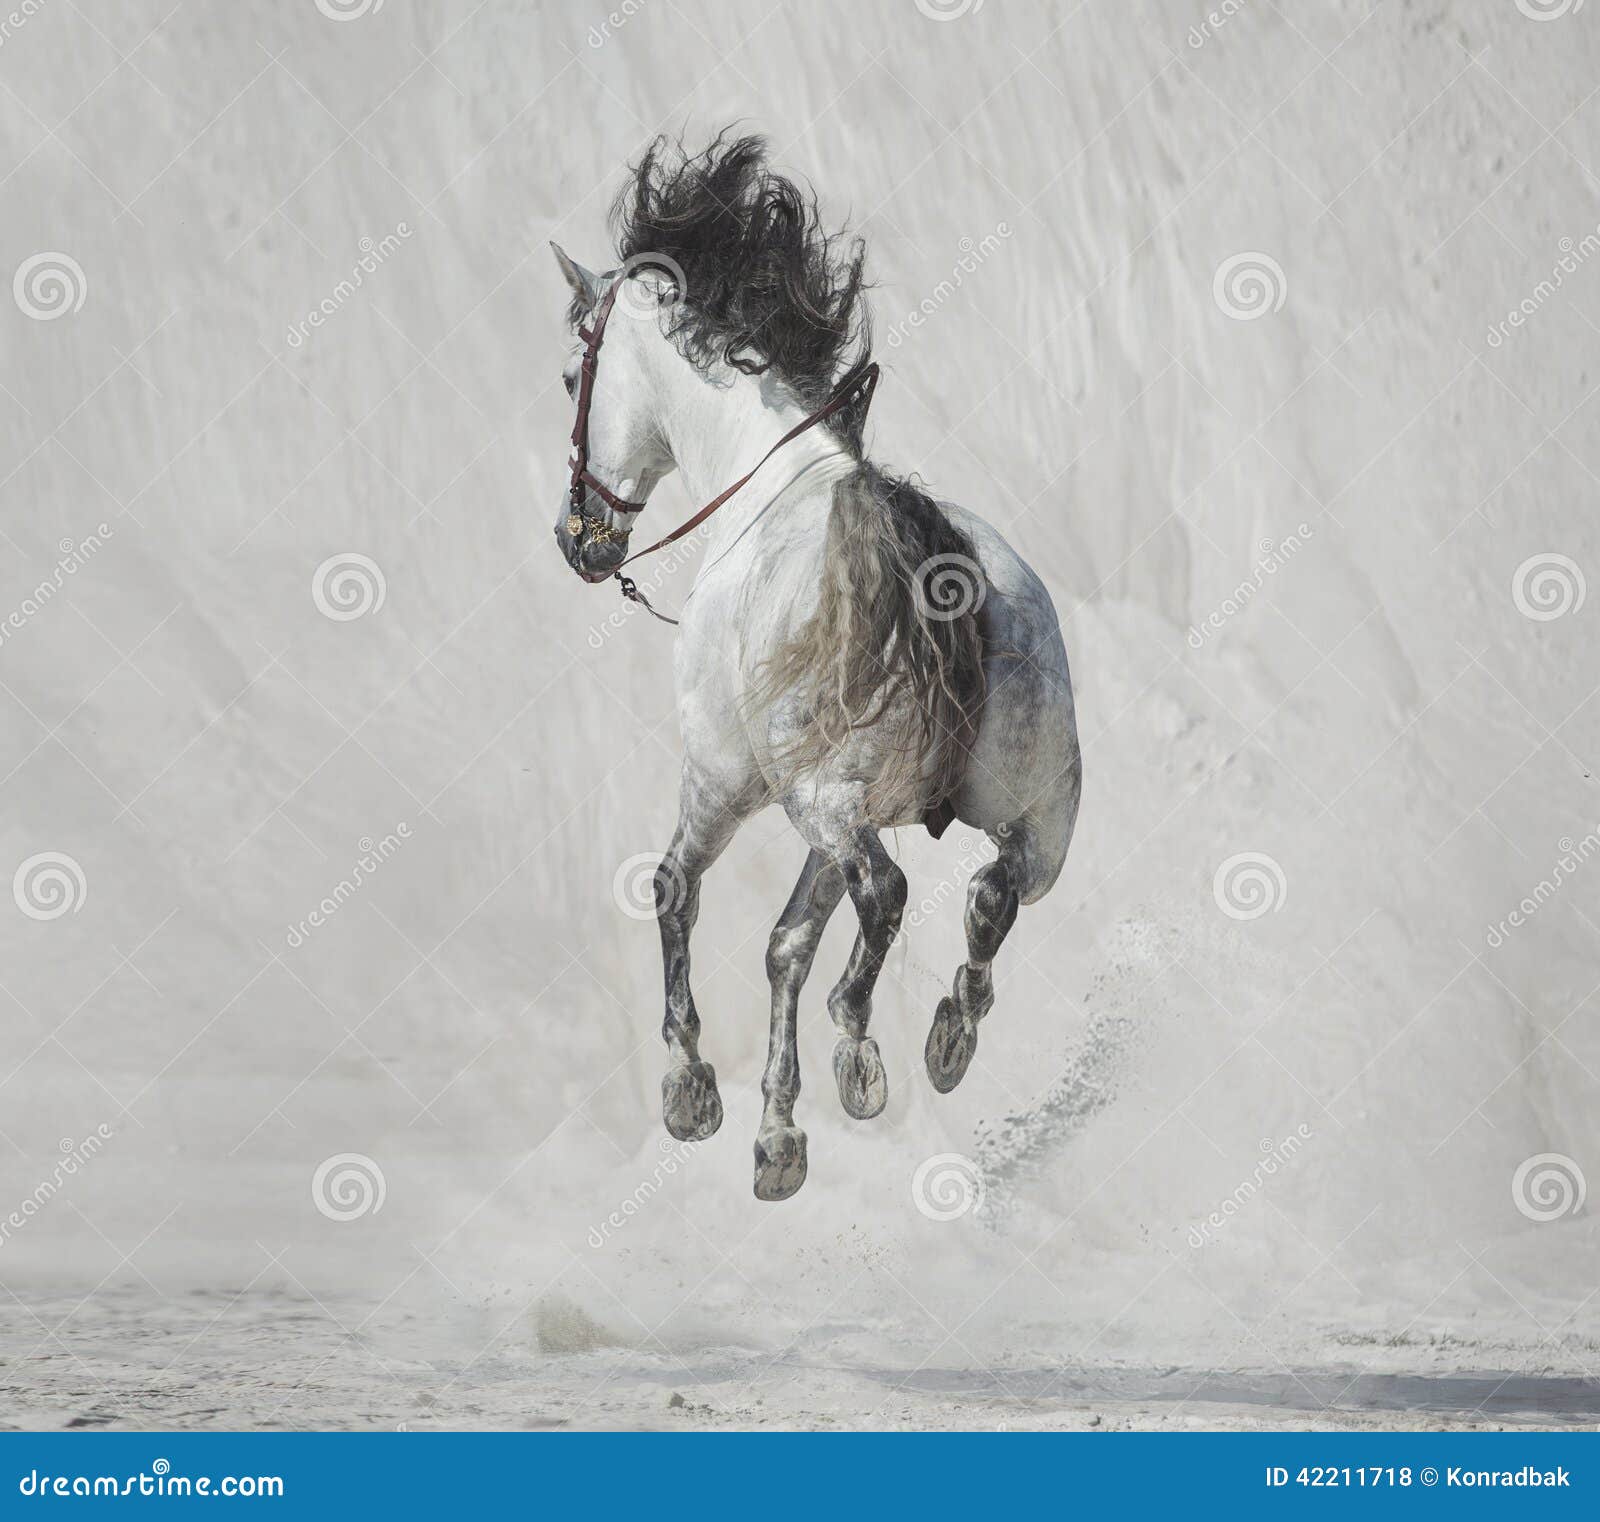 Page 23 | Abstract Horses Running Images - Free Download on Freepik